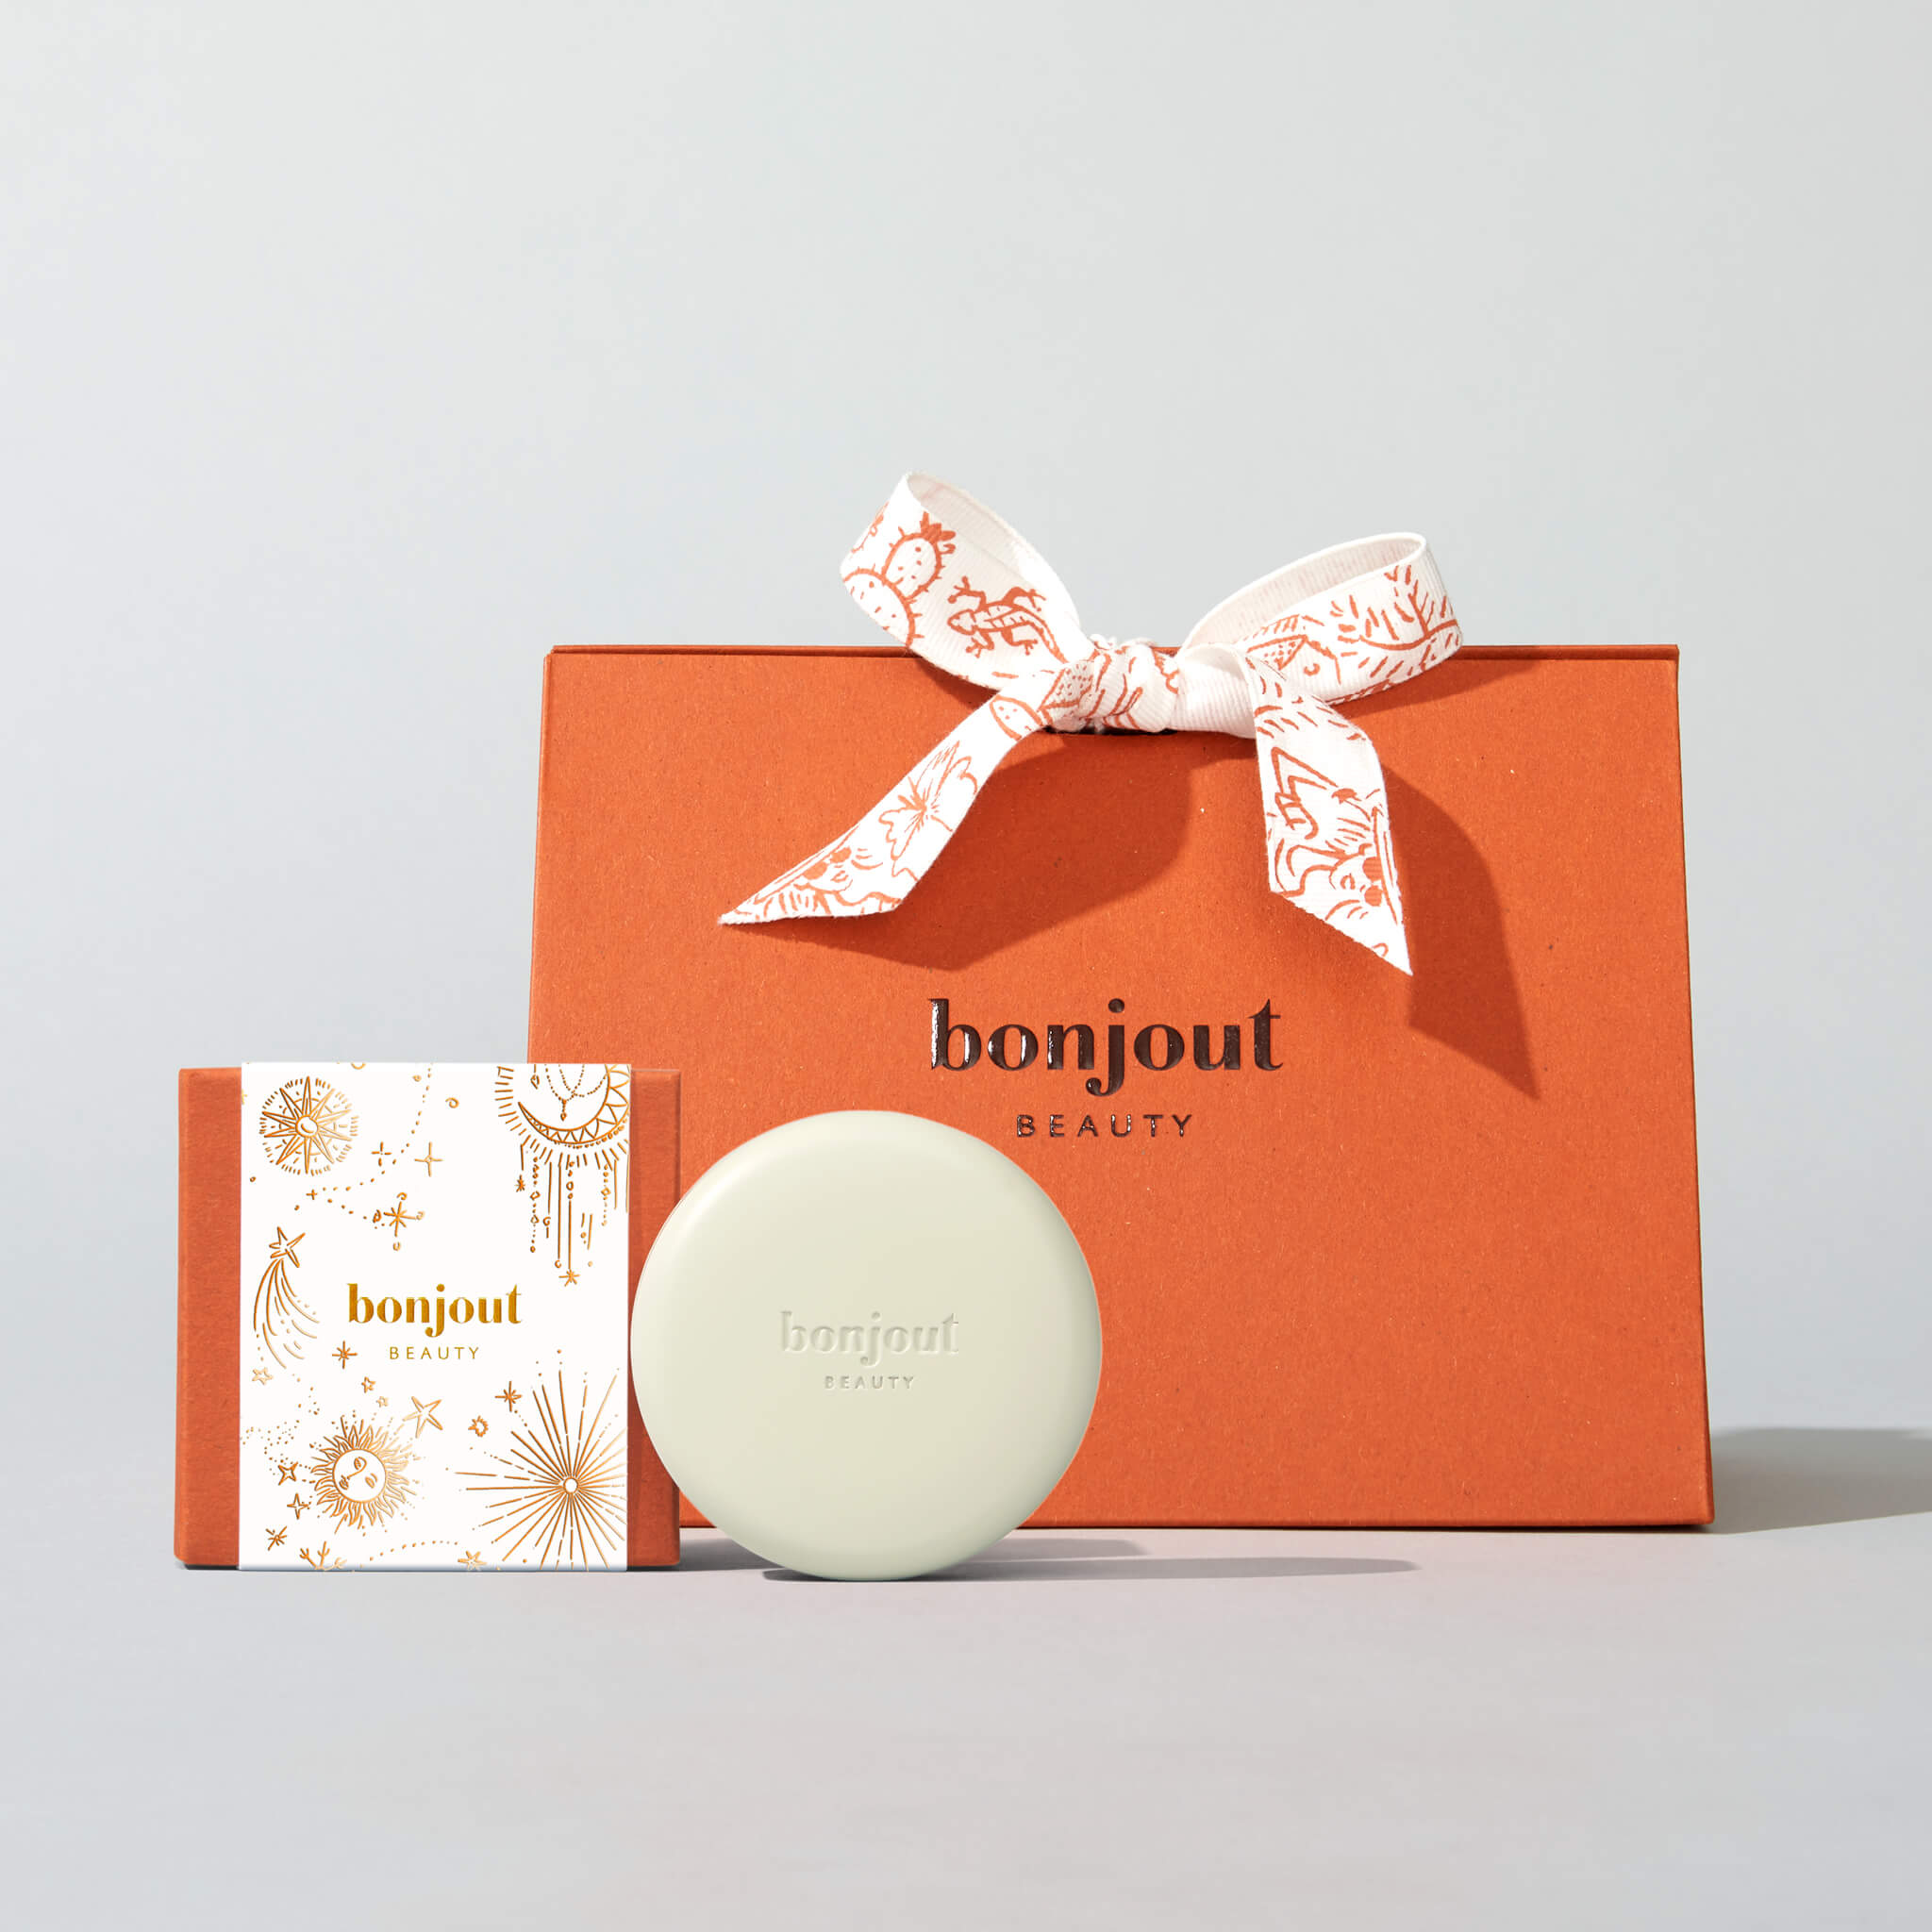 Bonjout Beauty's Le Balm Holiday Limited Edition and Gift Box